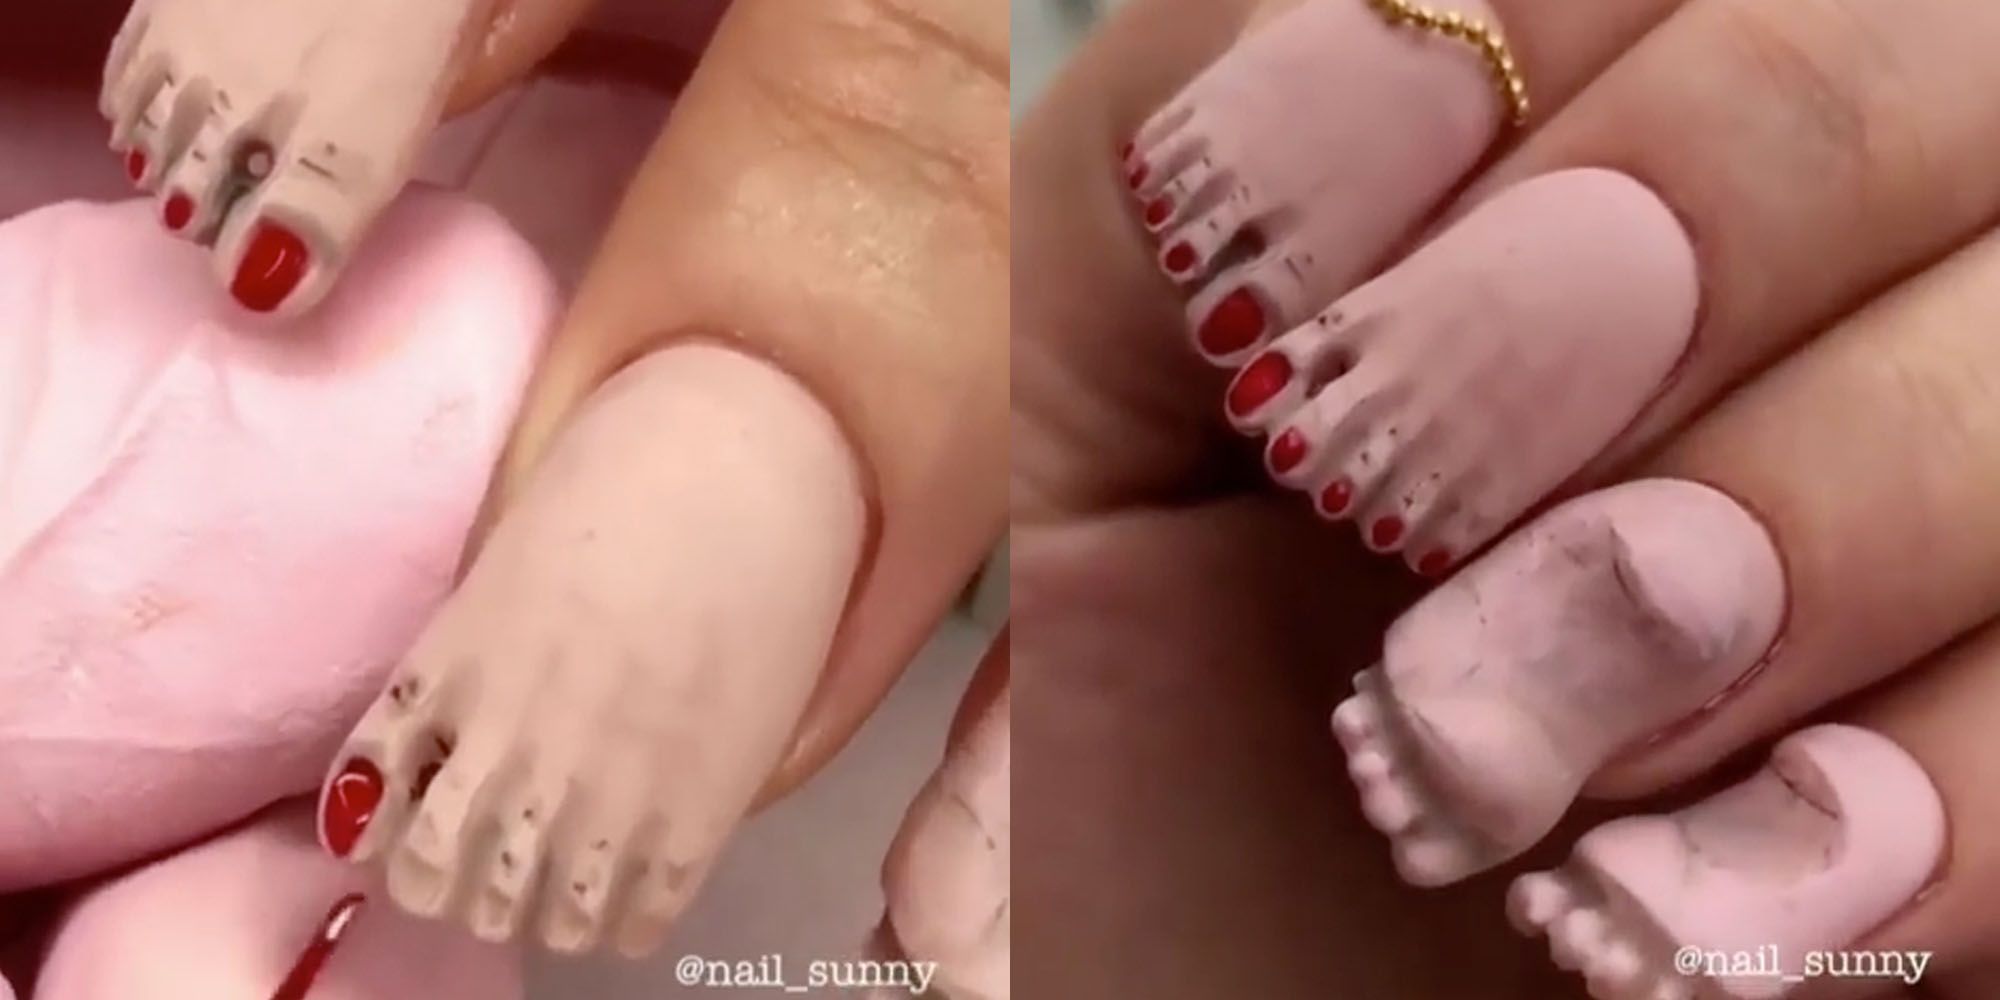 Pin by ℓυ on Pedicure | Simple toe nails, Toe nails, Pedicure nail designs